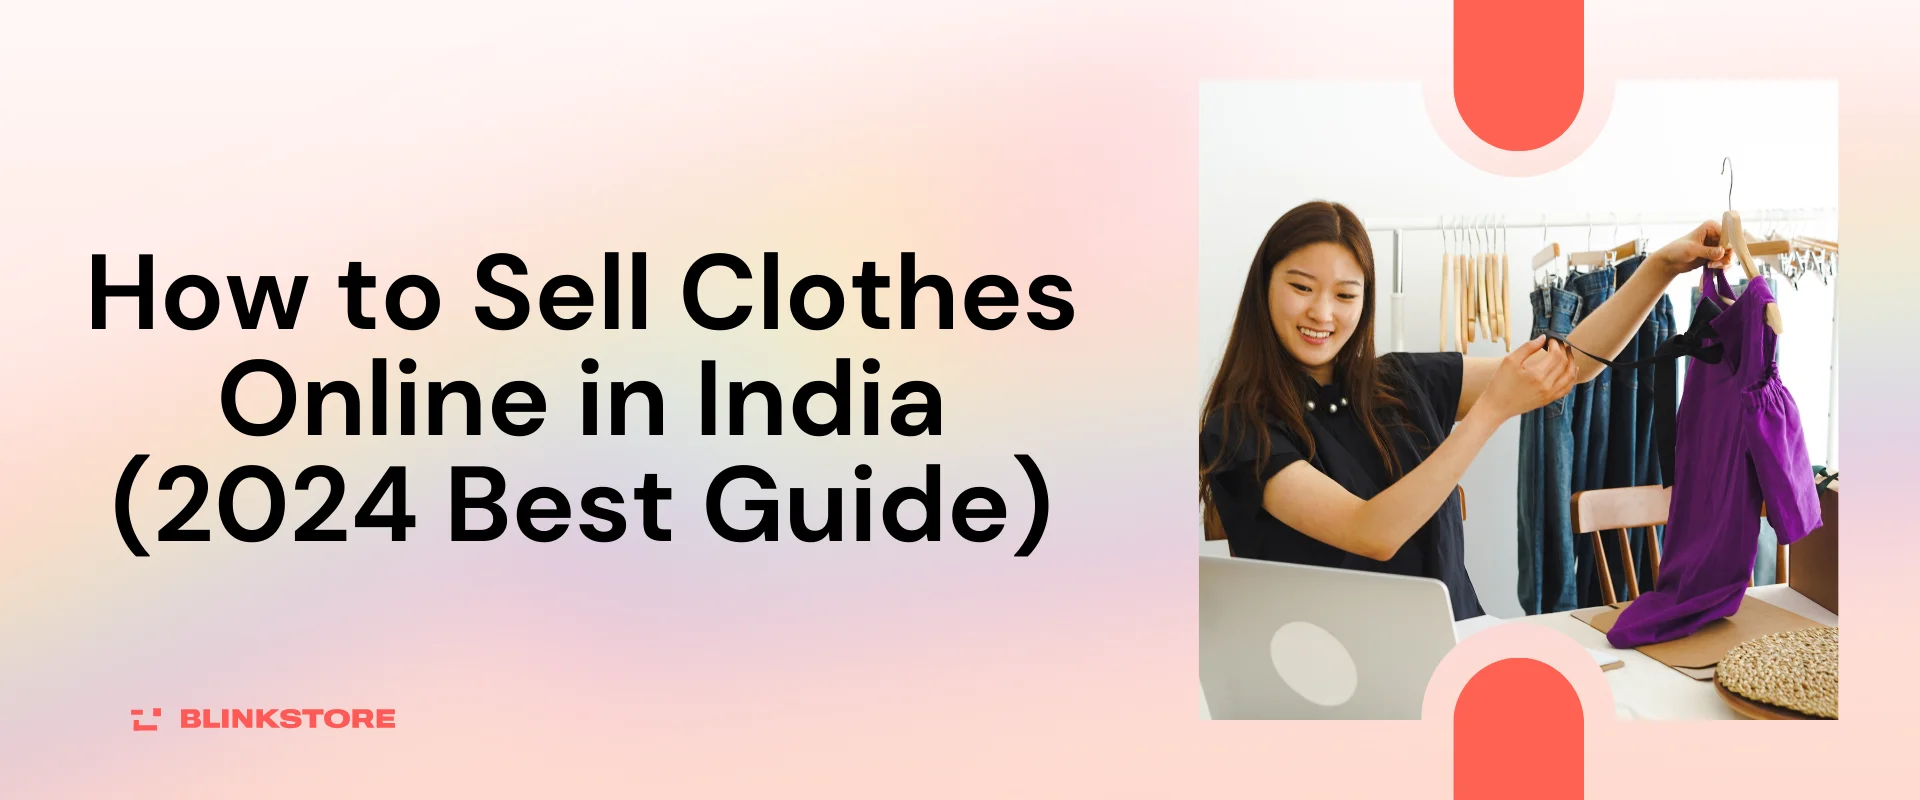 How to Sell Clothes Online in India (2024 Best Guide)